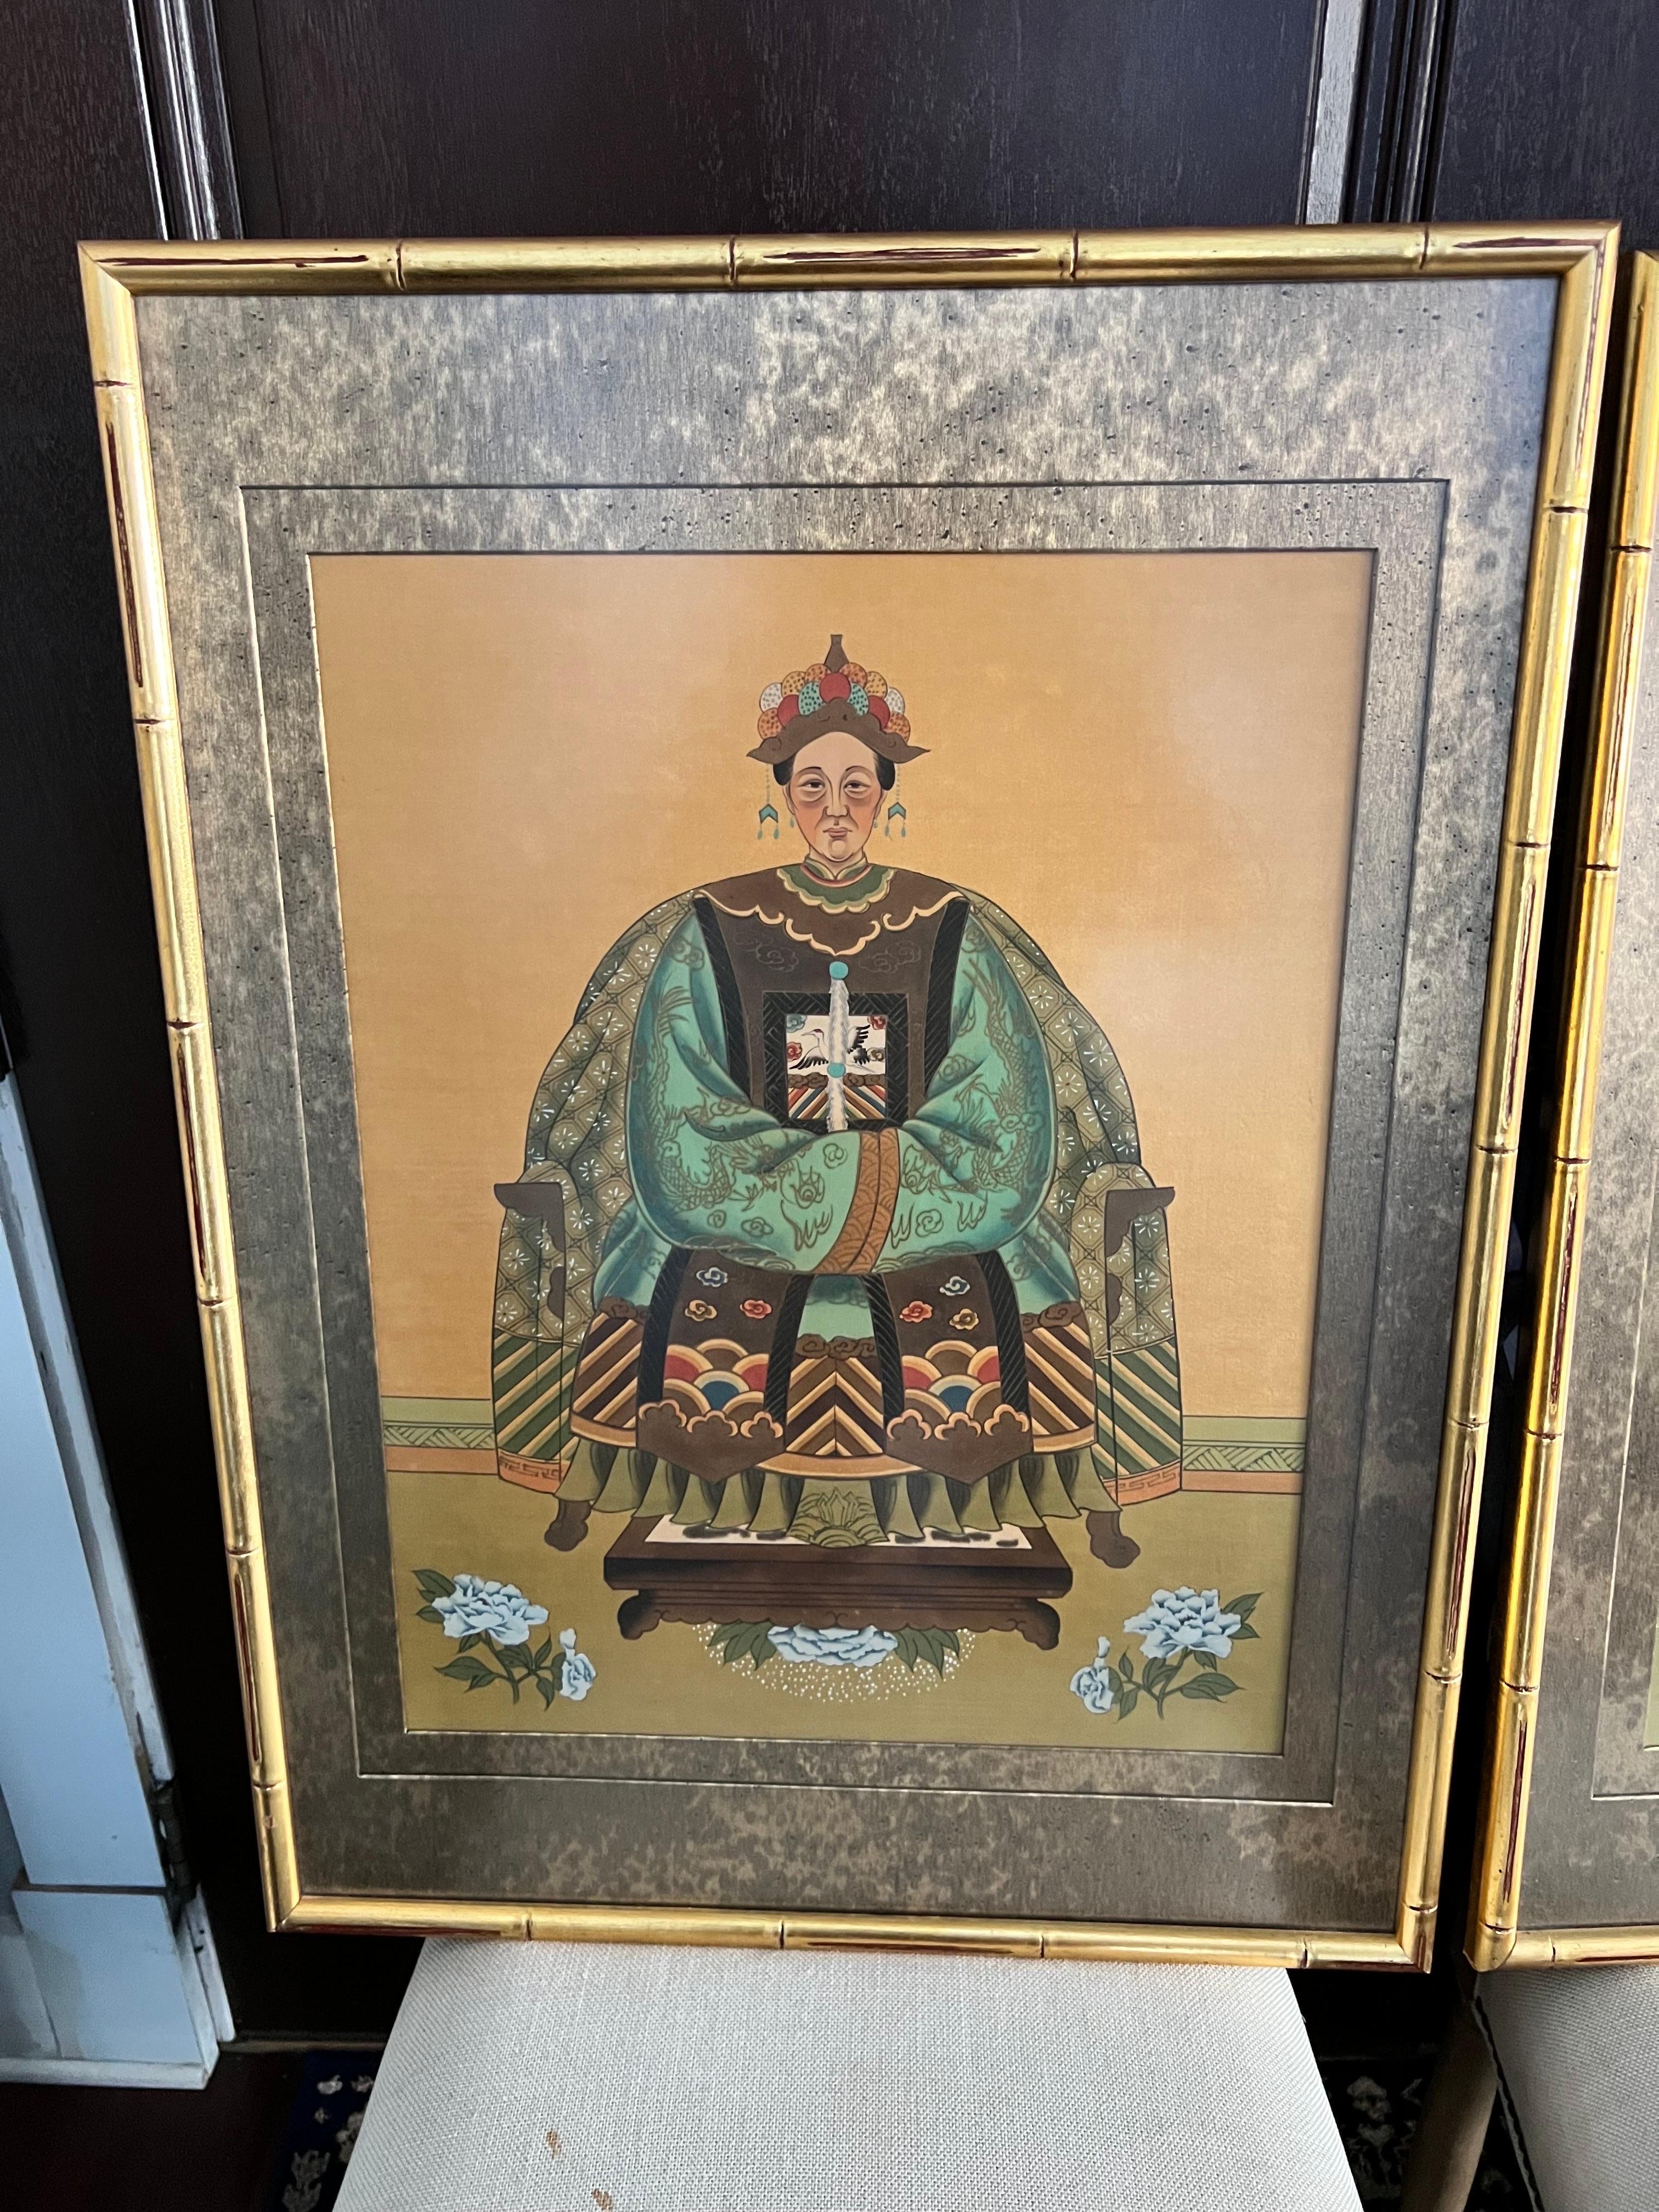 Stunning pair of vintage hand painted watercolor on silk portraits depicting a Chinese Emperor and Empress. They are wearing highly detailed robes in shades of aqua and terra cotta. Each is beautifully framed in a gold faux bamboo wood frame, and